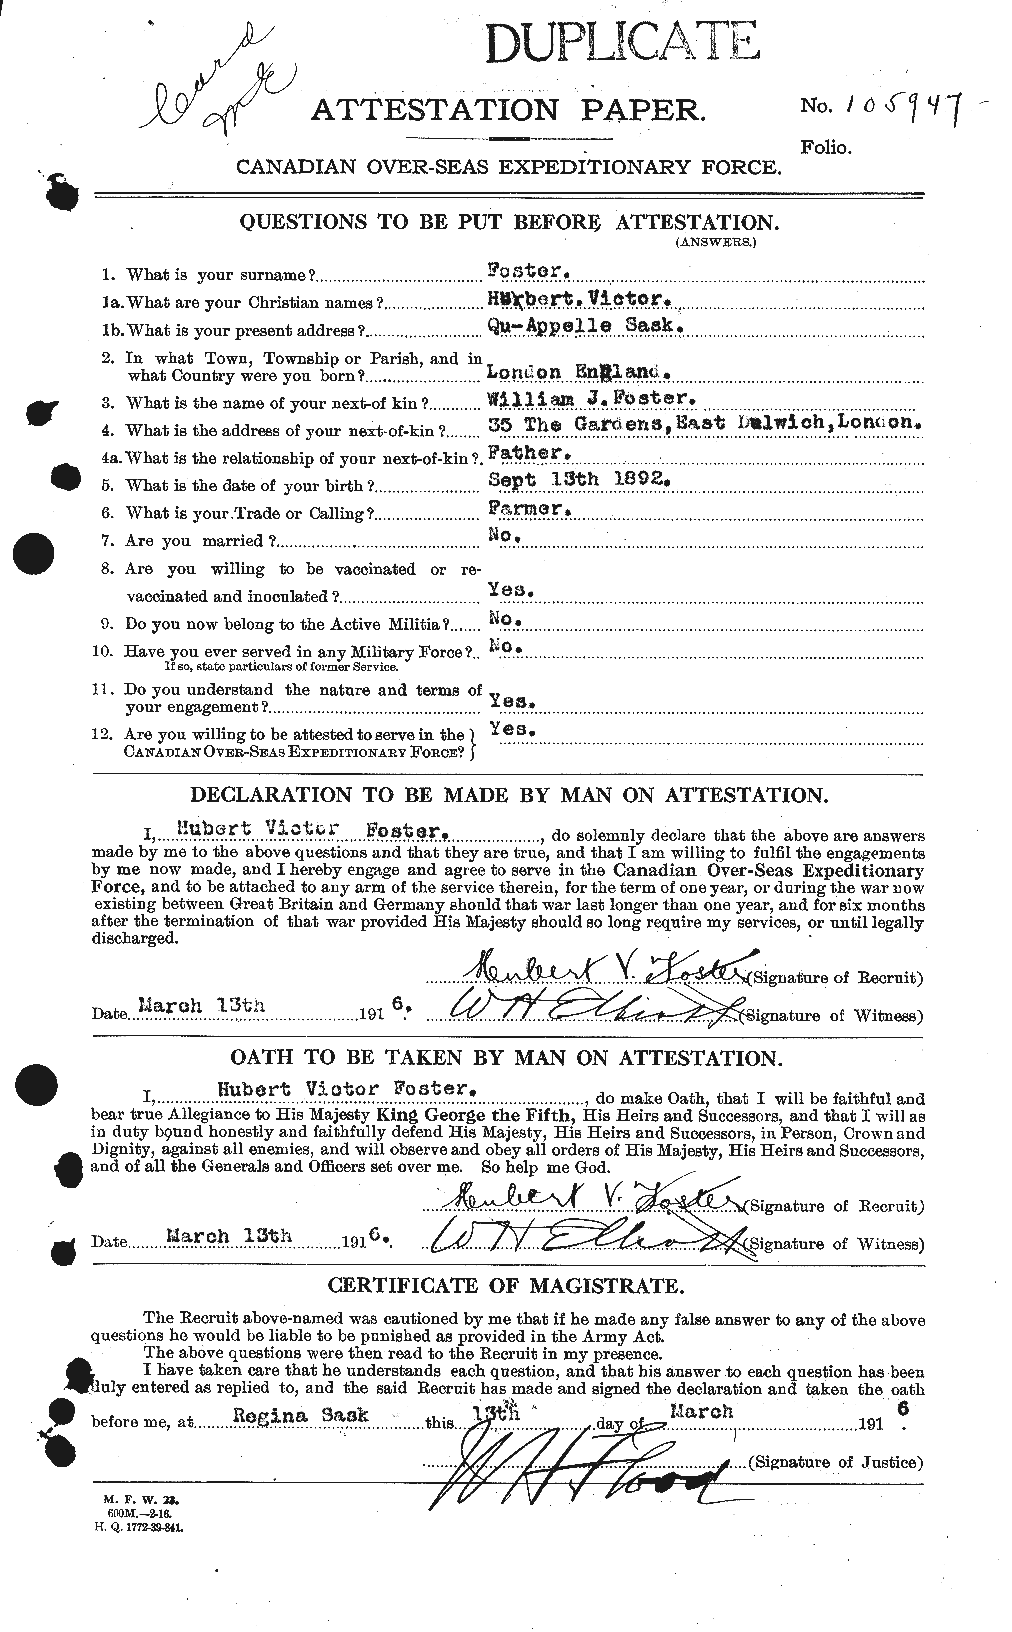 Personnel Records of the First World War - CEF 333267a